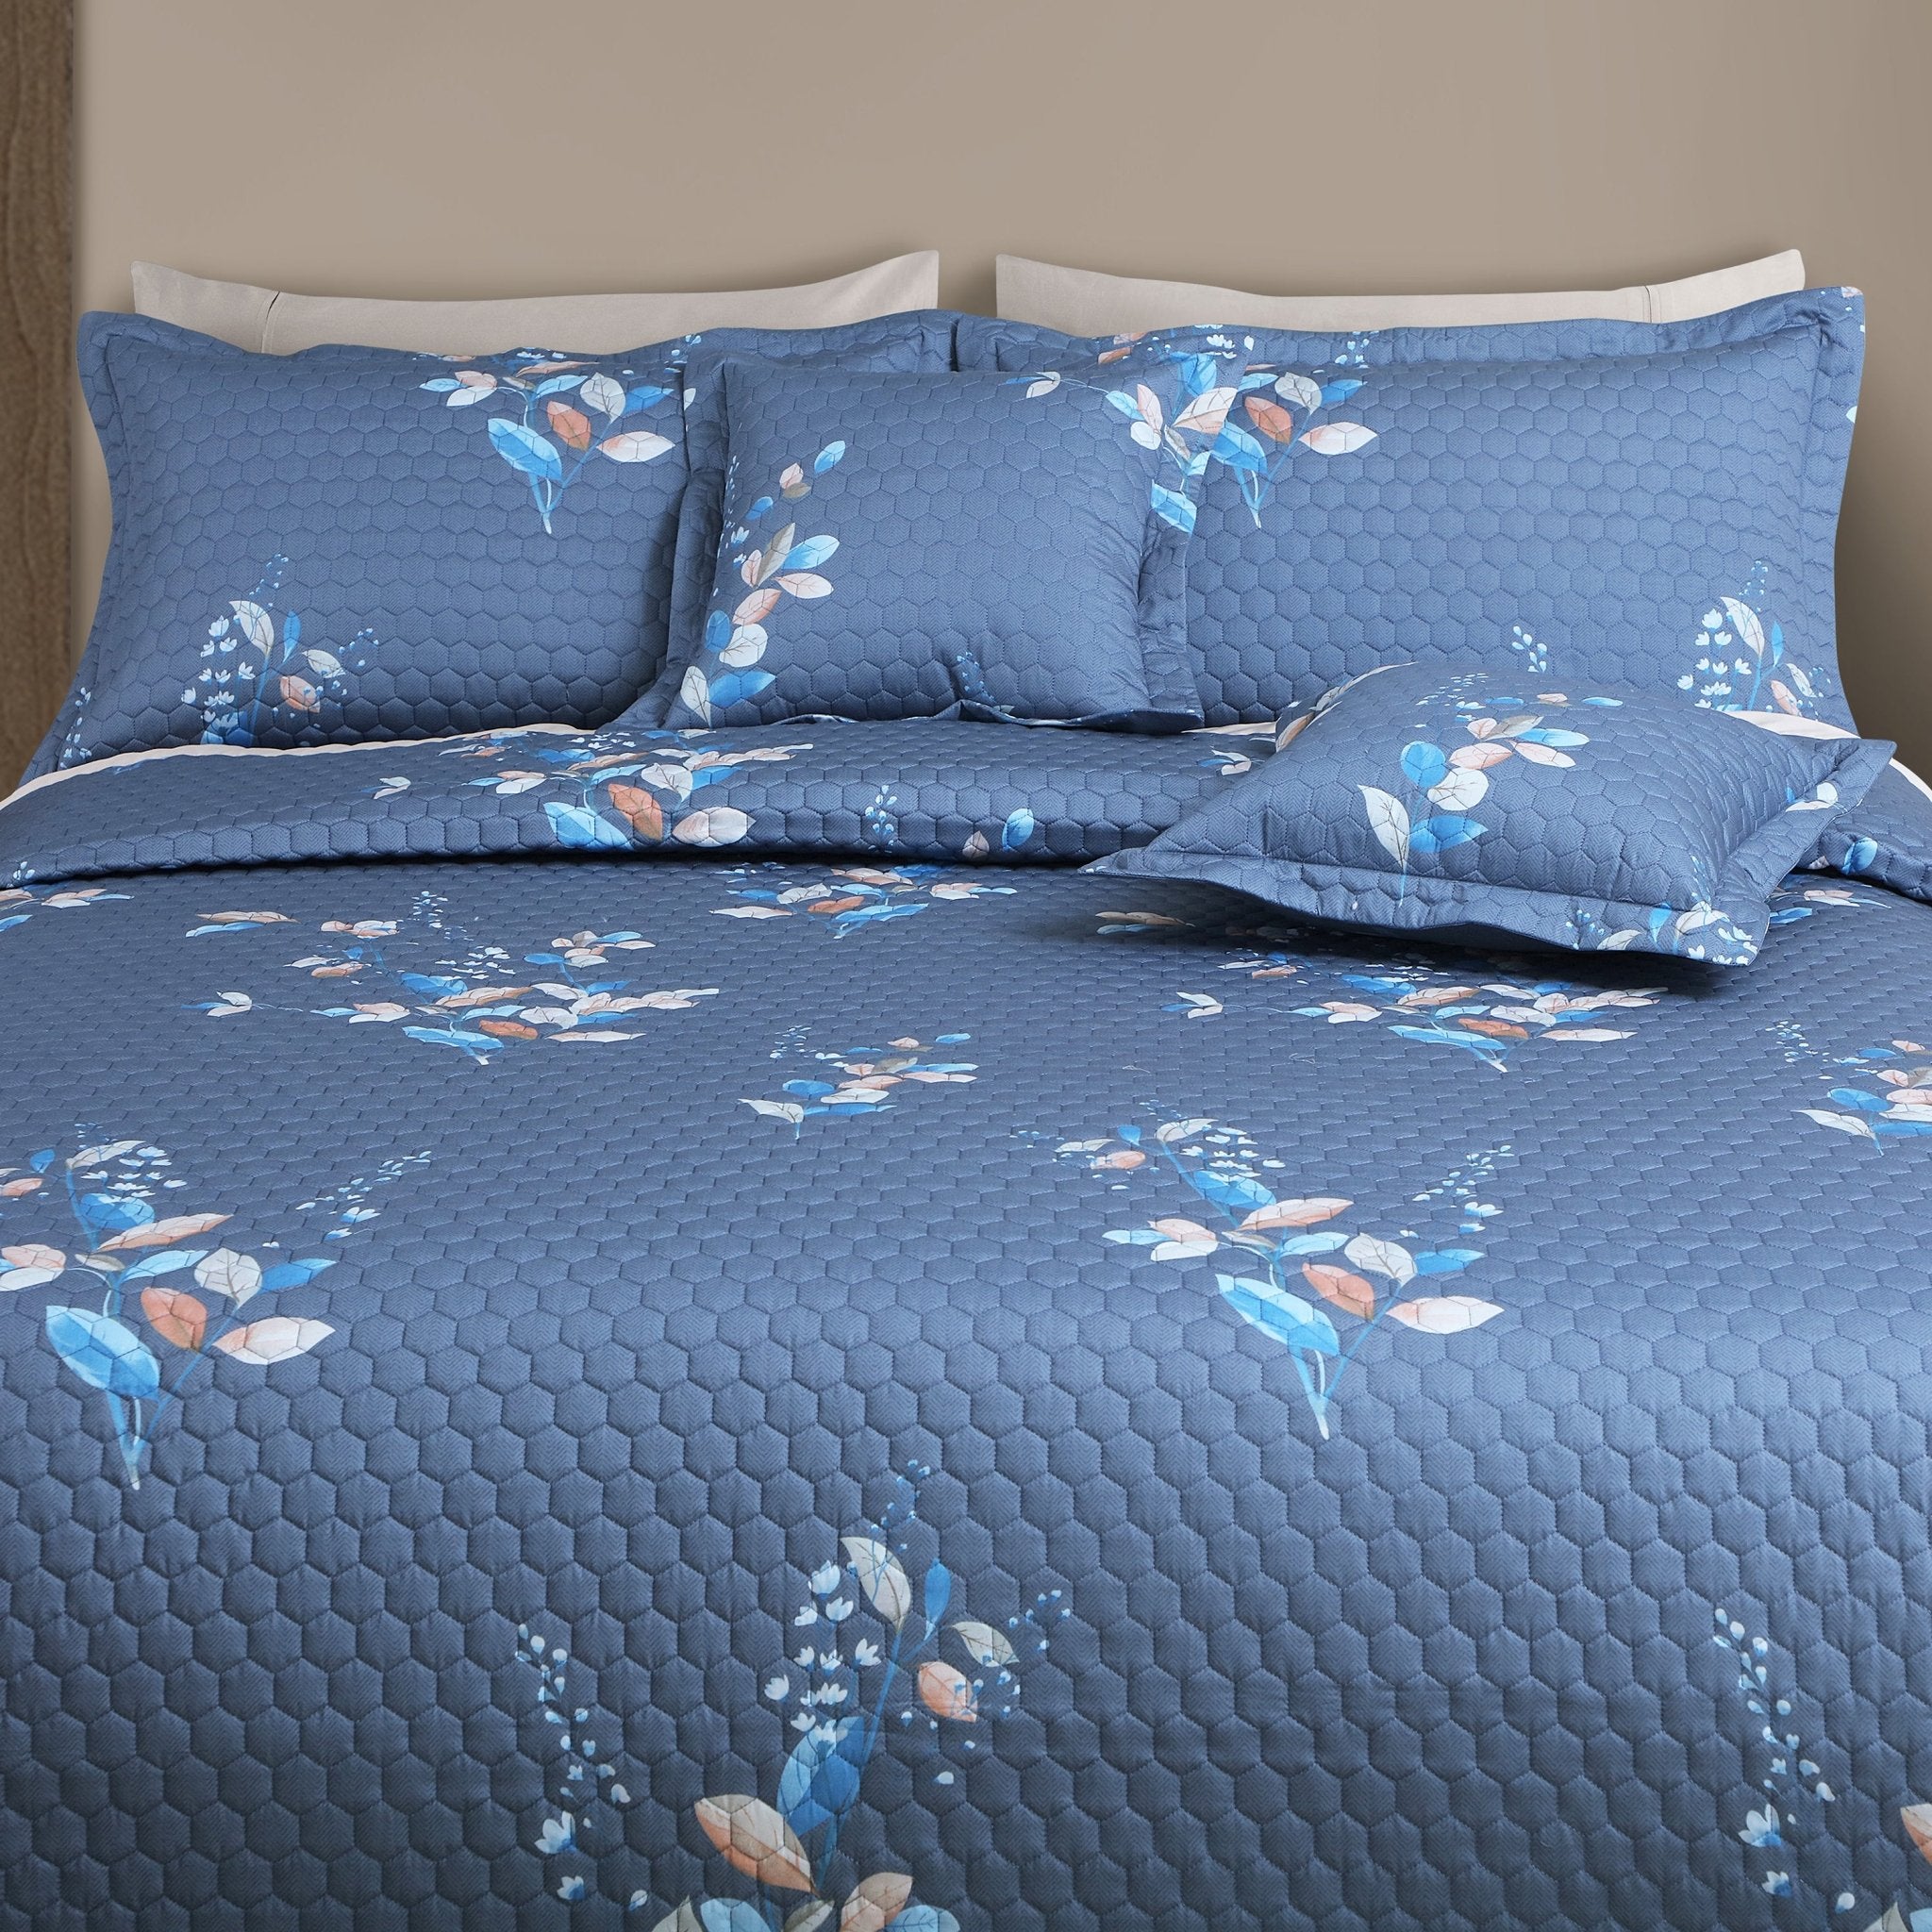 Malako Royale Quilted Bed Cover - Blue 100% Cotton King Size Bedspread - MALAKO